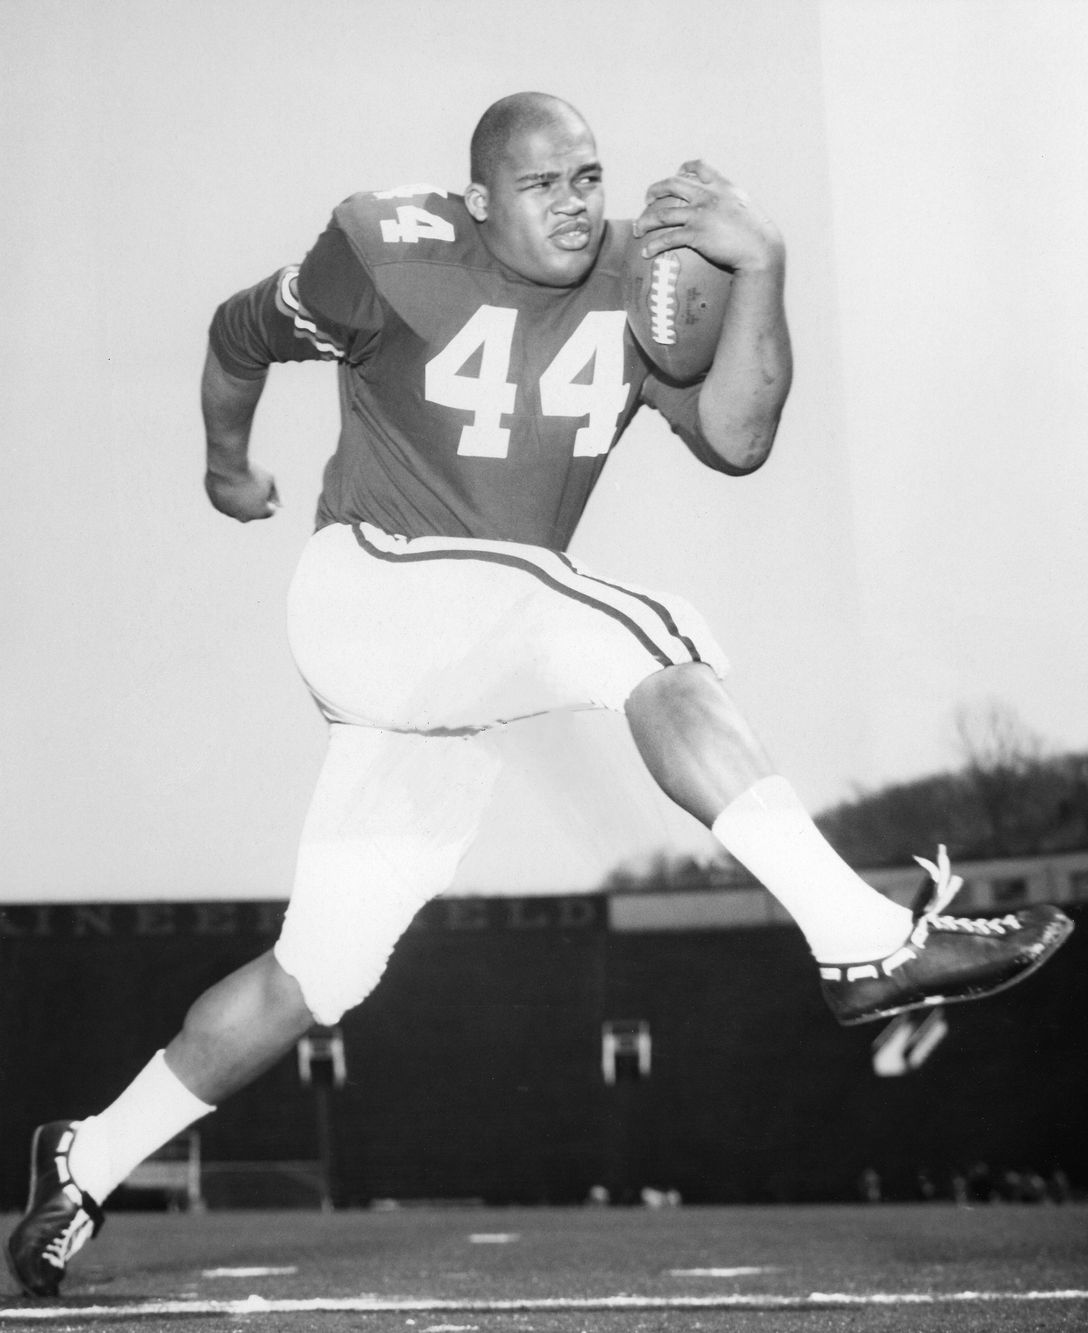 Jim Braxton, wearing a No. 44 jersey, poses as if running while carrying a football.